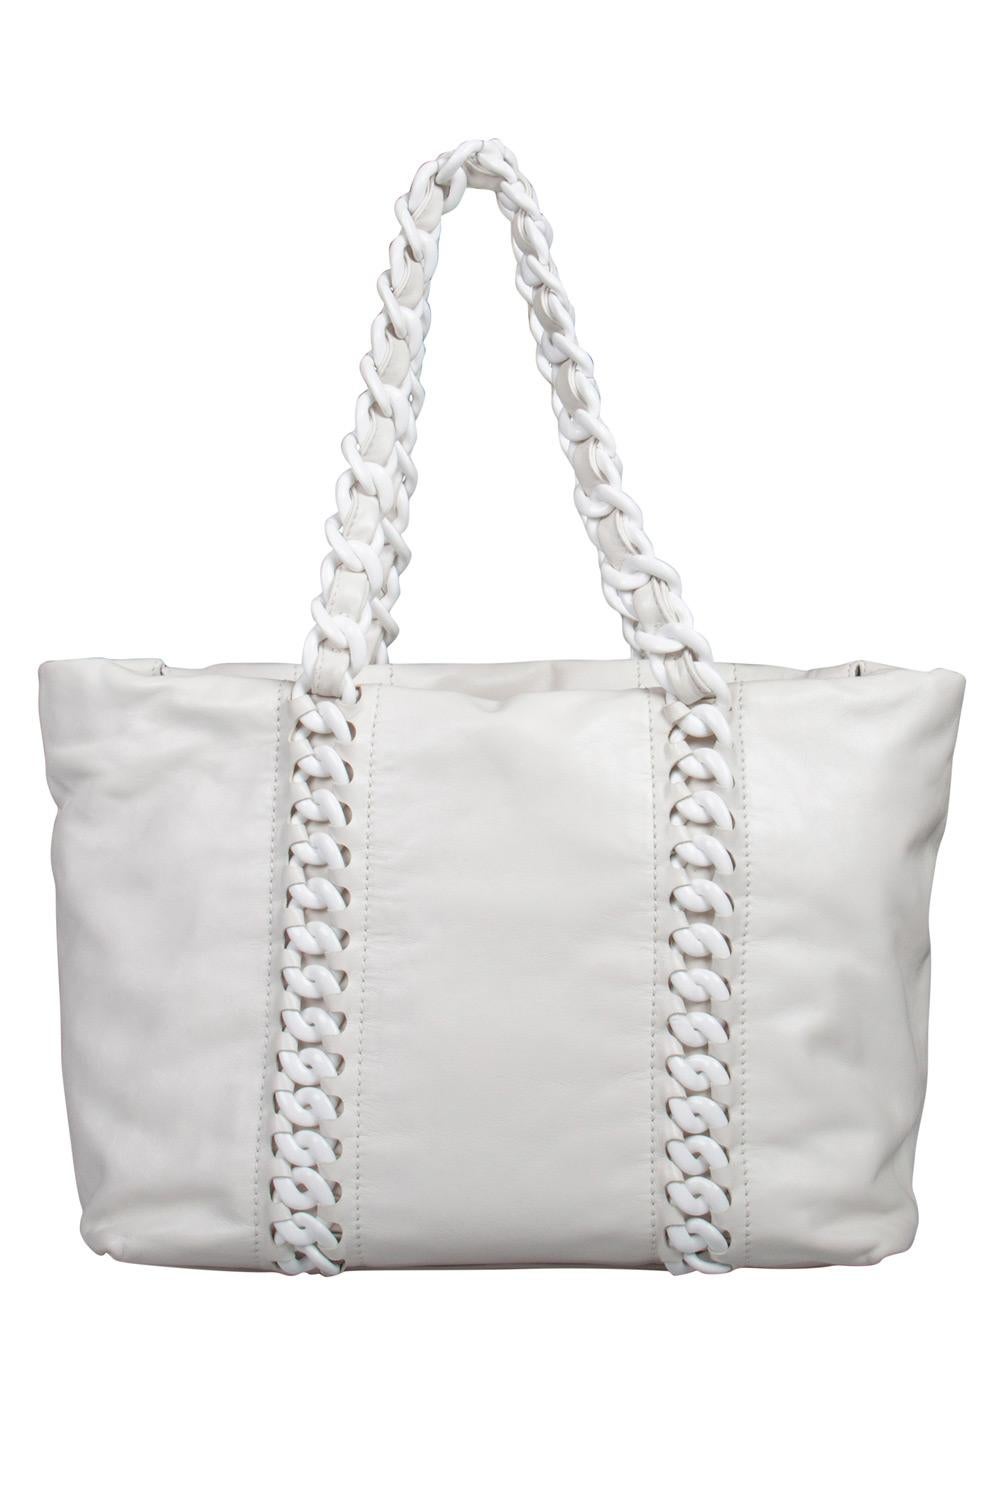 The Rhodoid tote combines classic Chanel with edgy detailing, creating a unique, modern day bag. Its all white leather exterior with the large CC logo is accented with bold chain link handles. The spacious interior is lined with satin and features